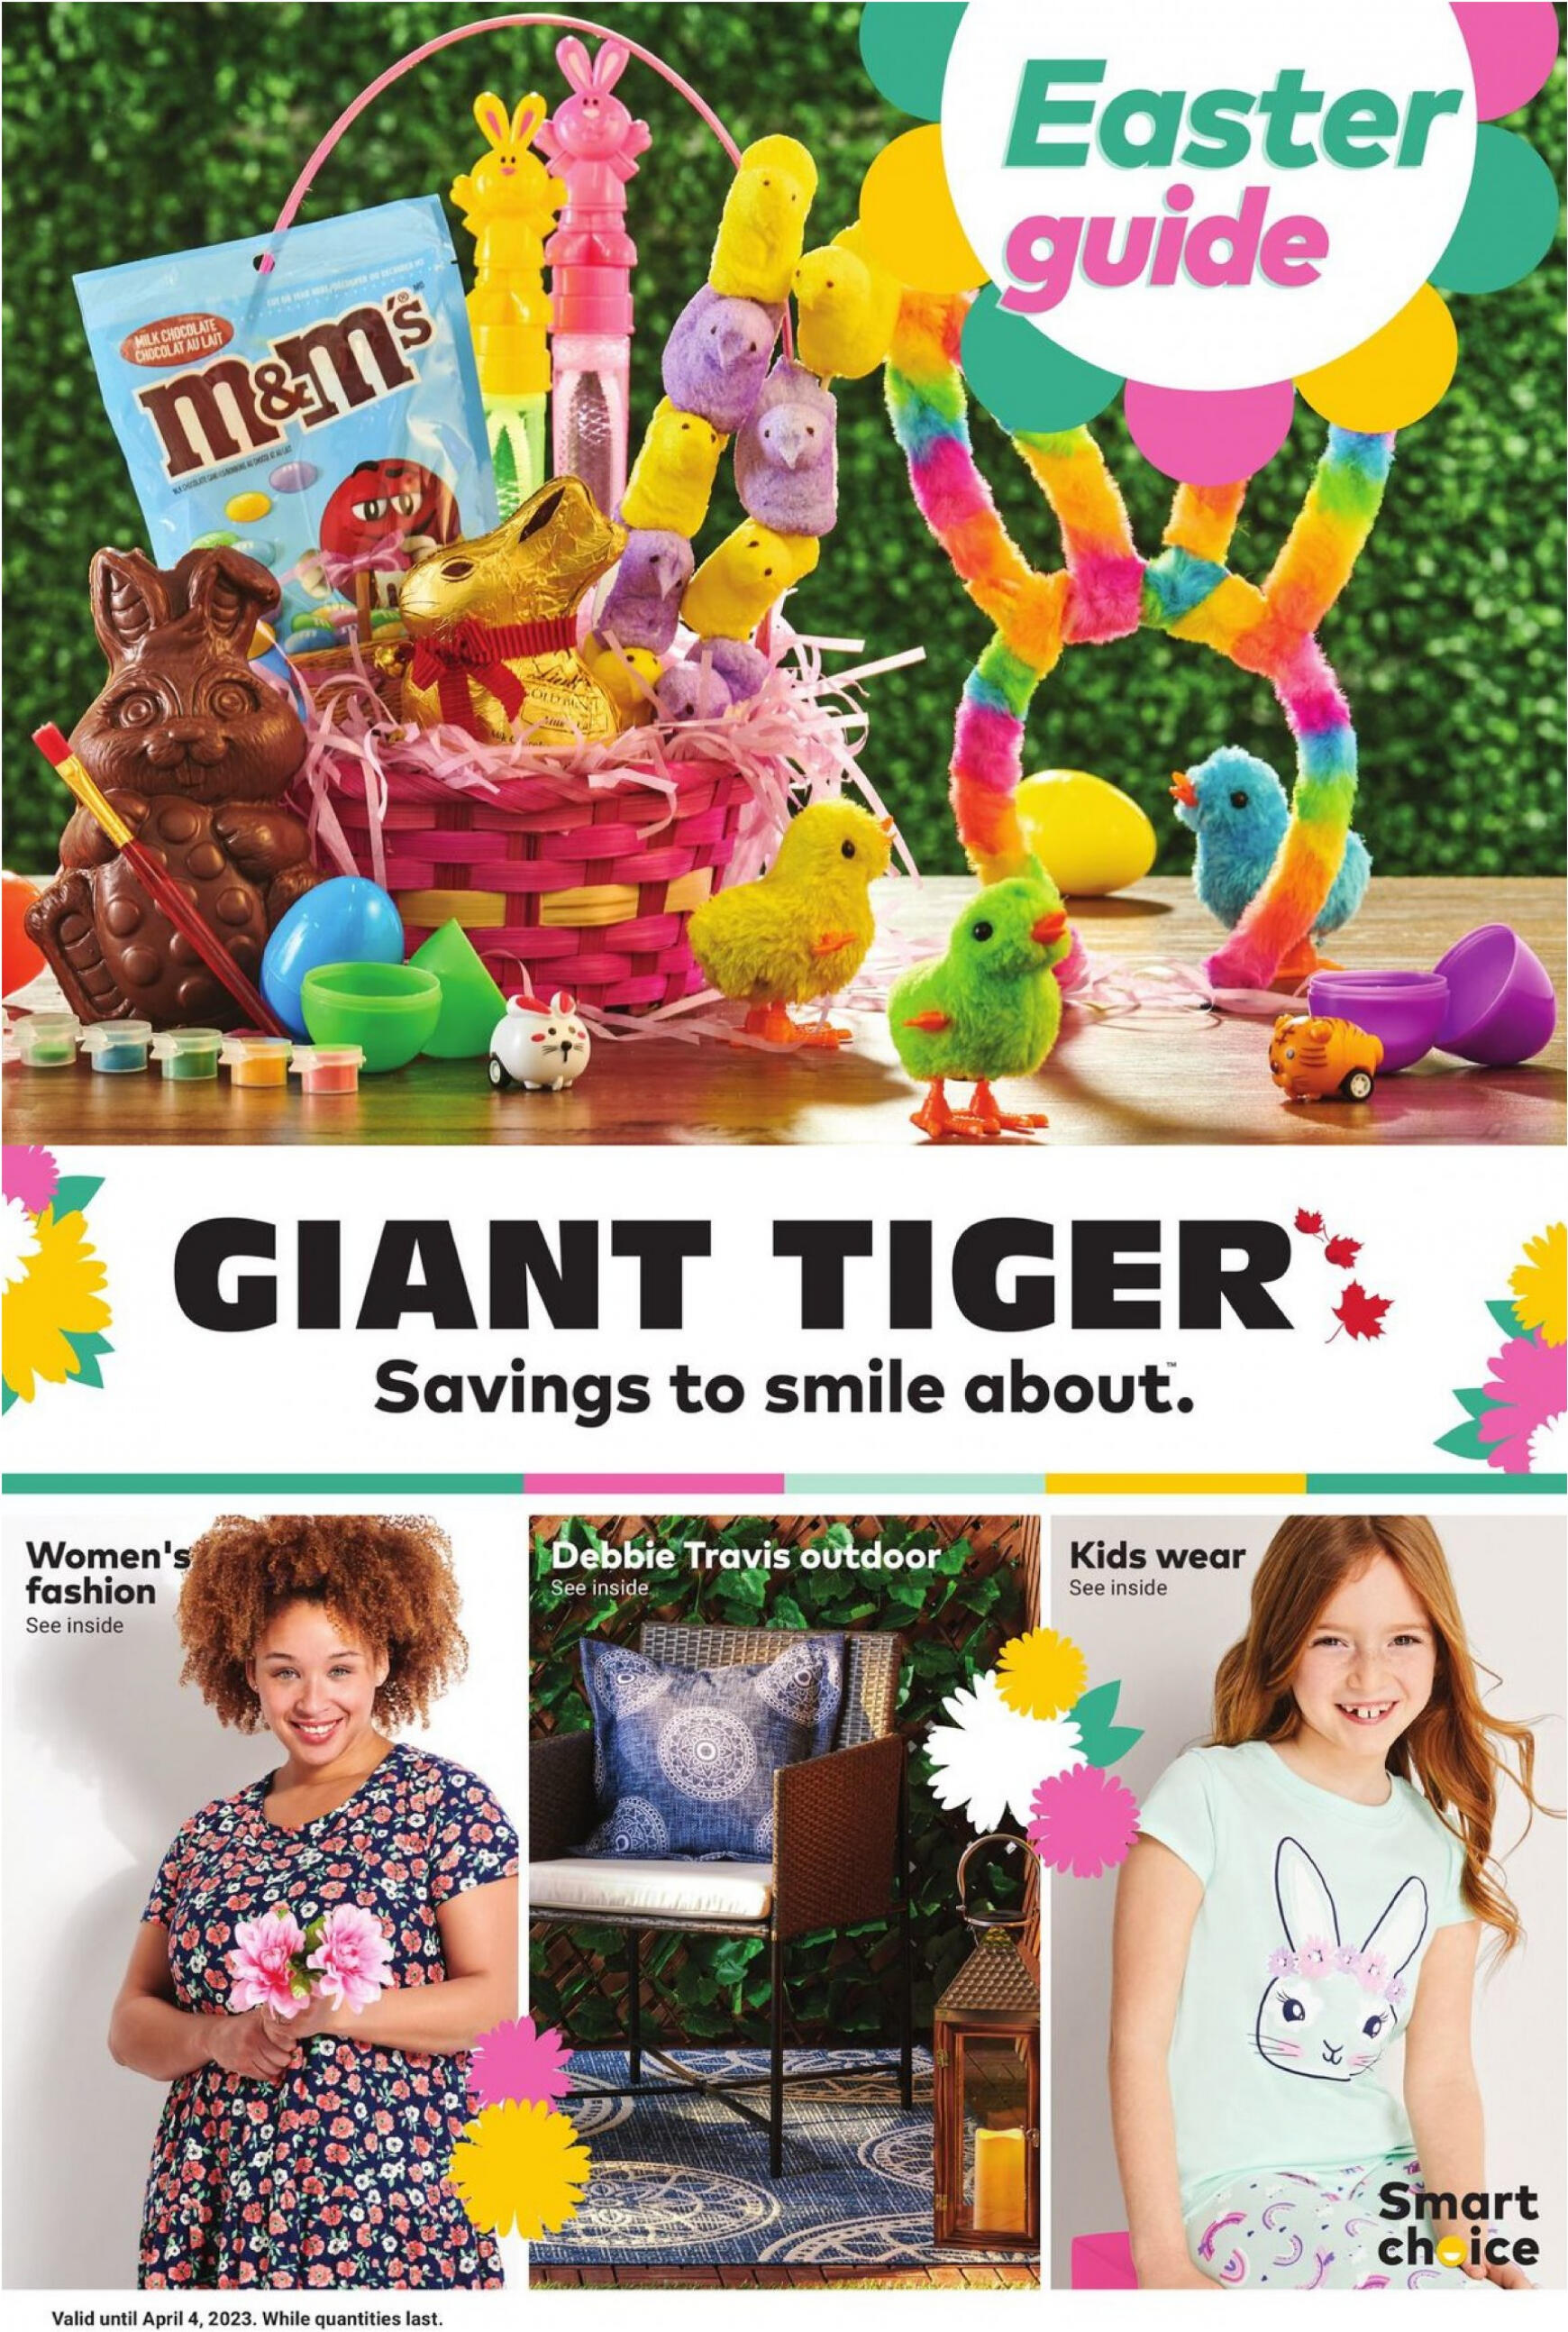 giant-tiger - Giant Tiger Easter guide